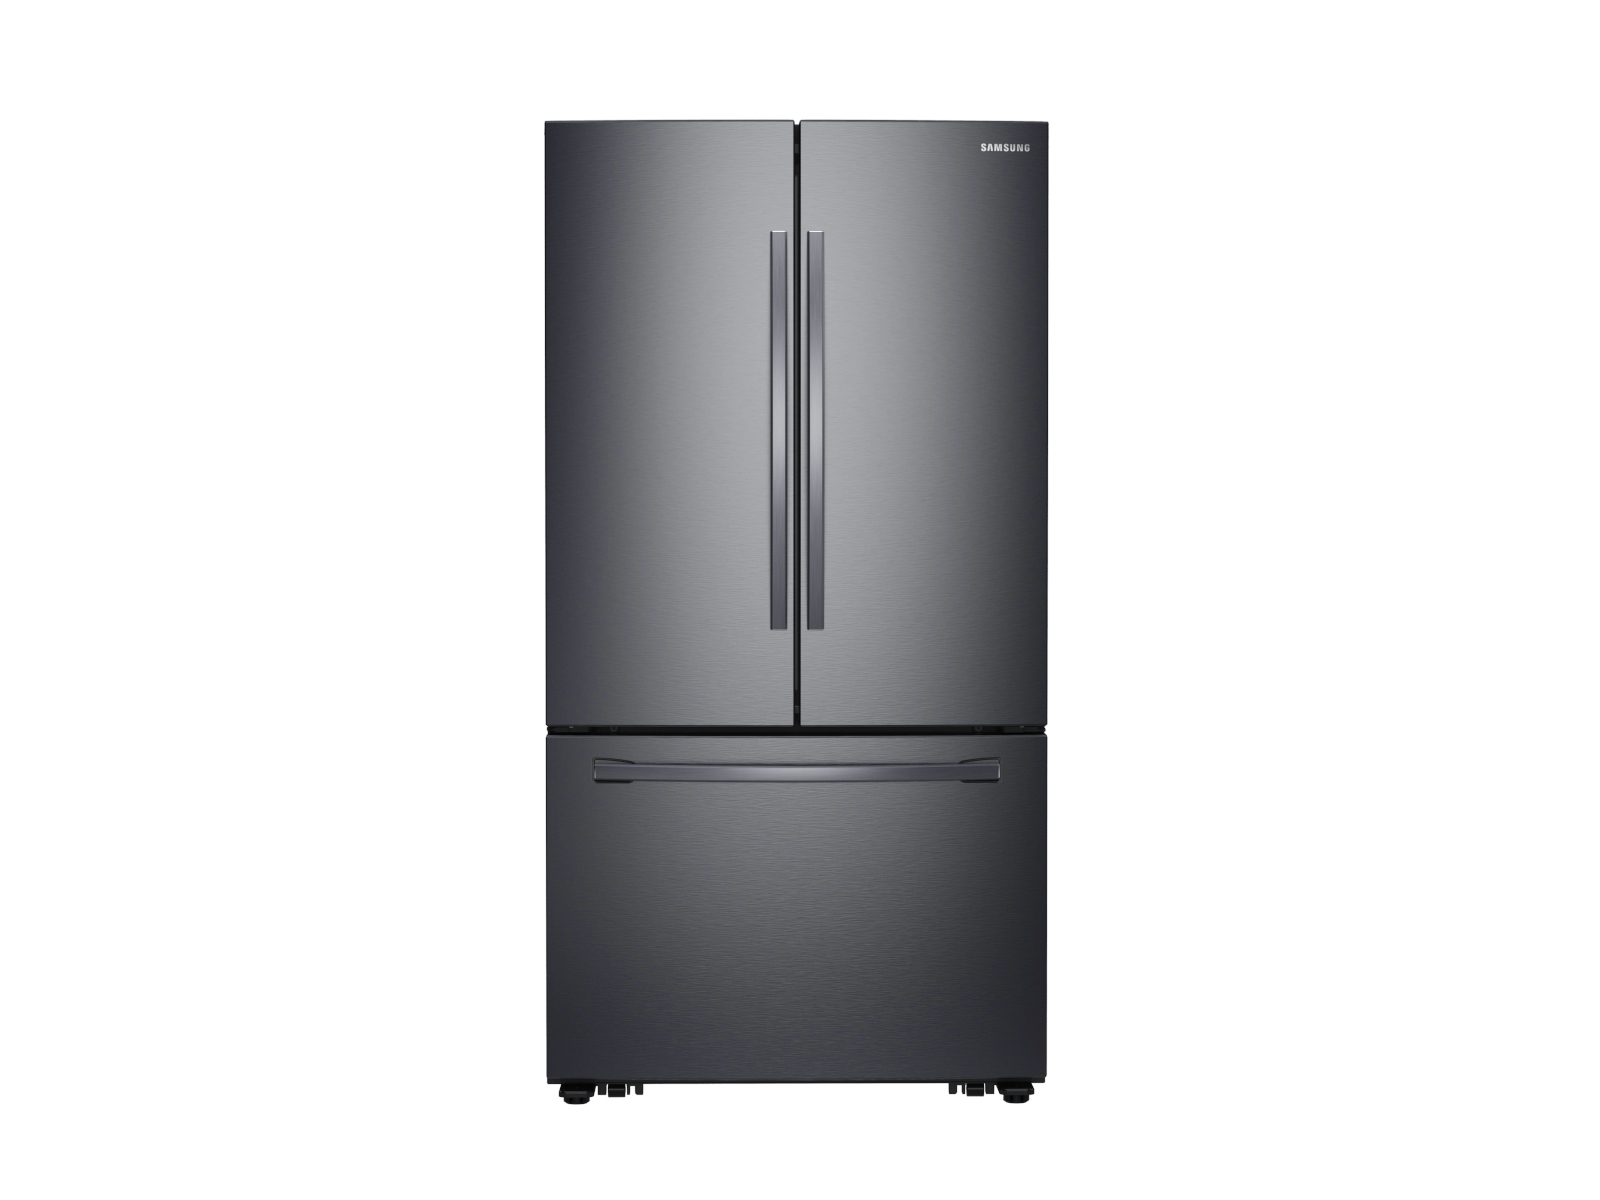 Thumbnail image of 28 cu. ft. Large Capacity 3-Door French Door Refrigerator with AutoFill Water Pitcher in Black Stainless Steel